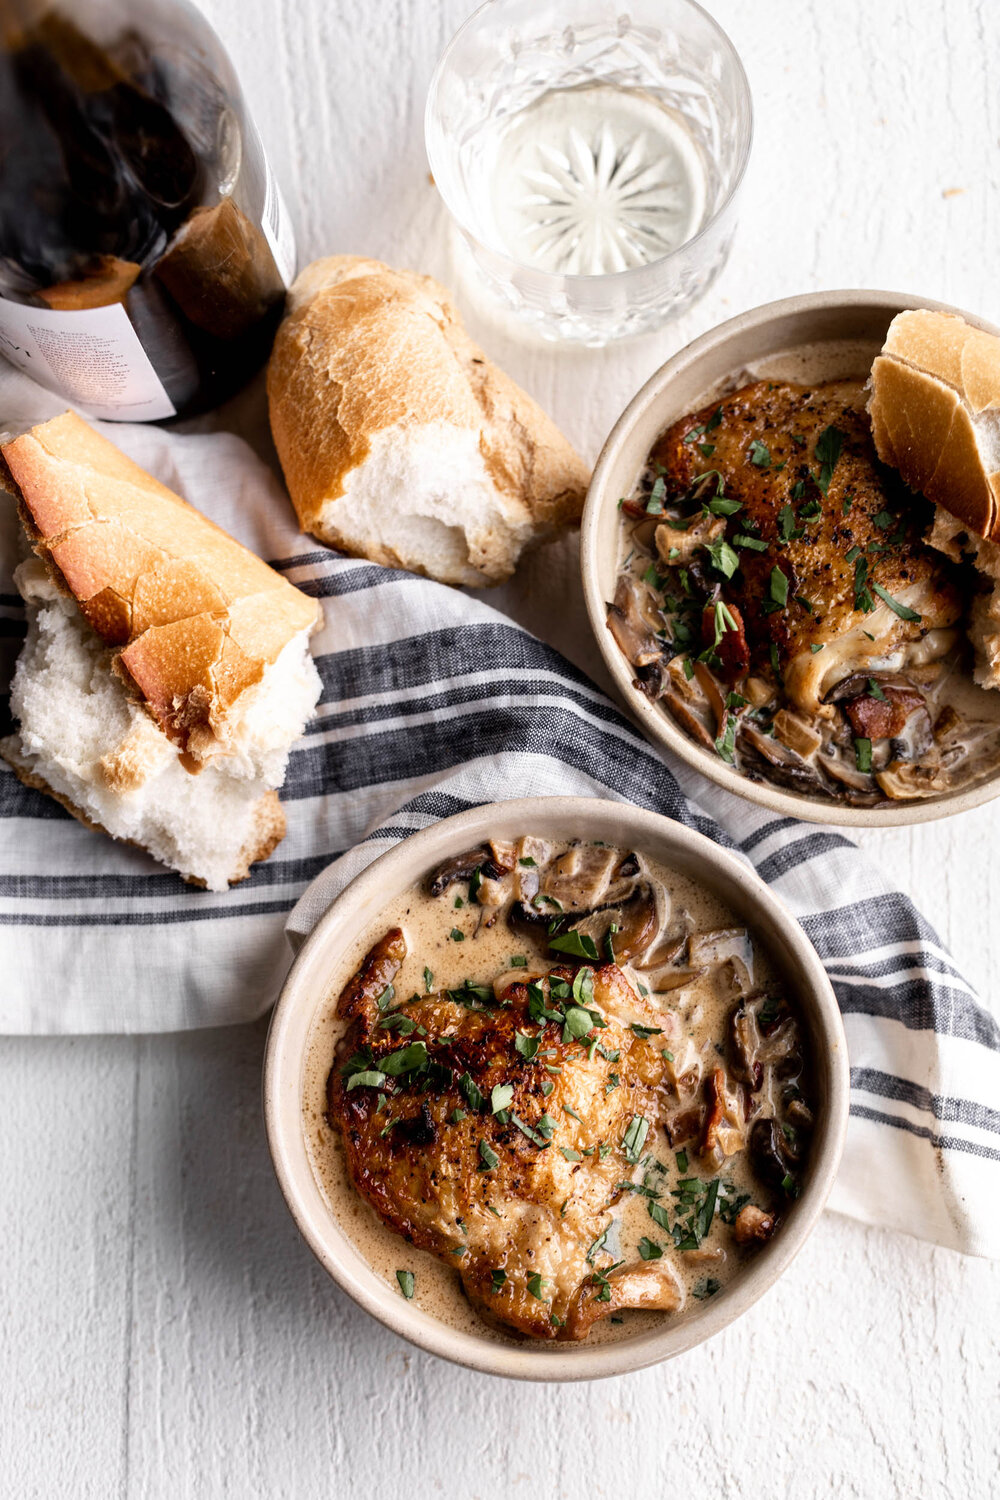 Coq Au Vin Blanc with mushrooms and bacon in a creamy white wine sauce in bowls with bread and white wine